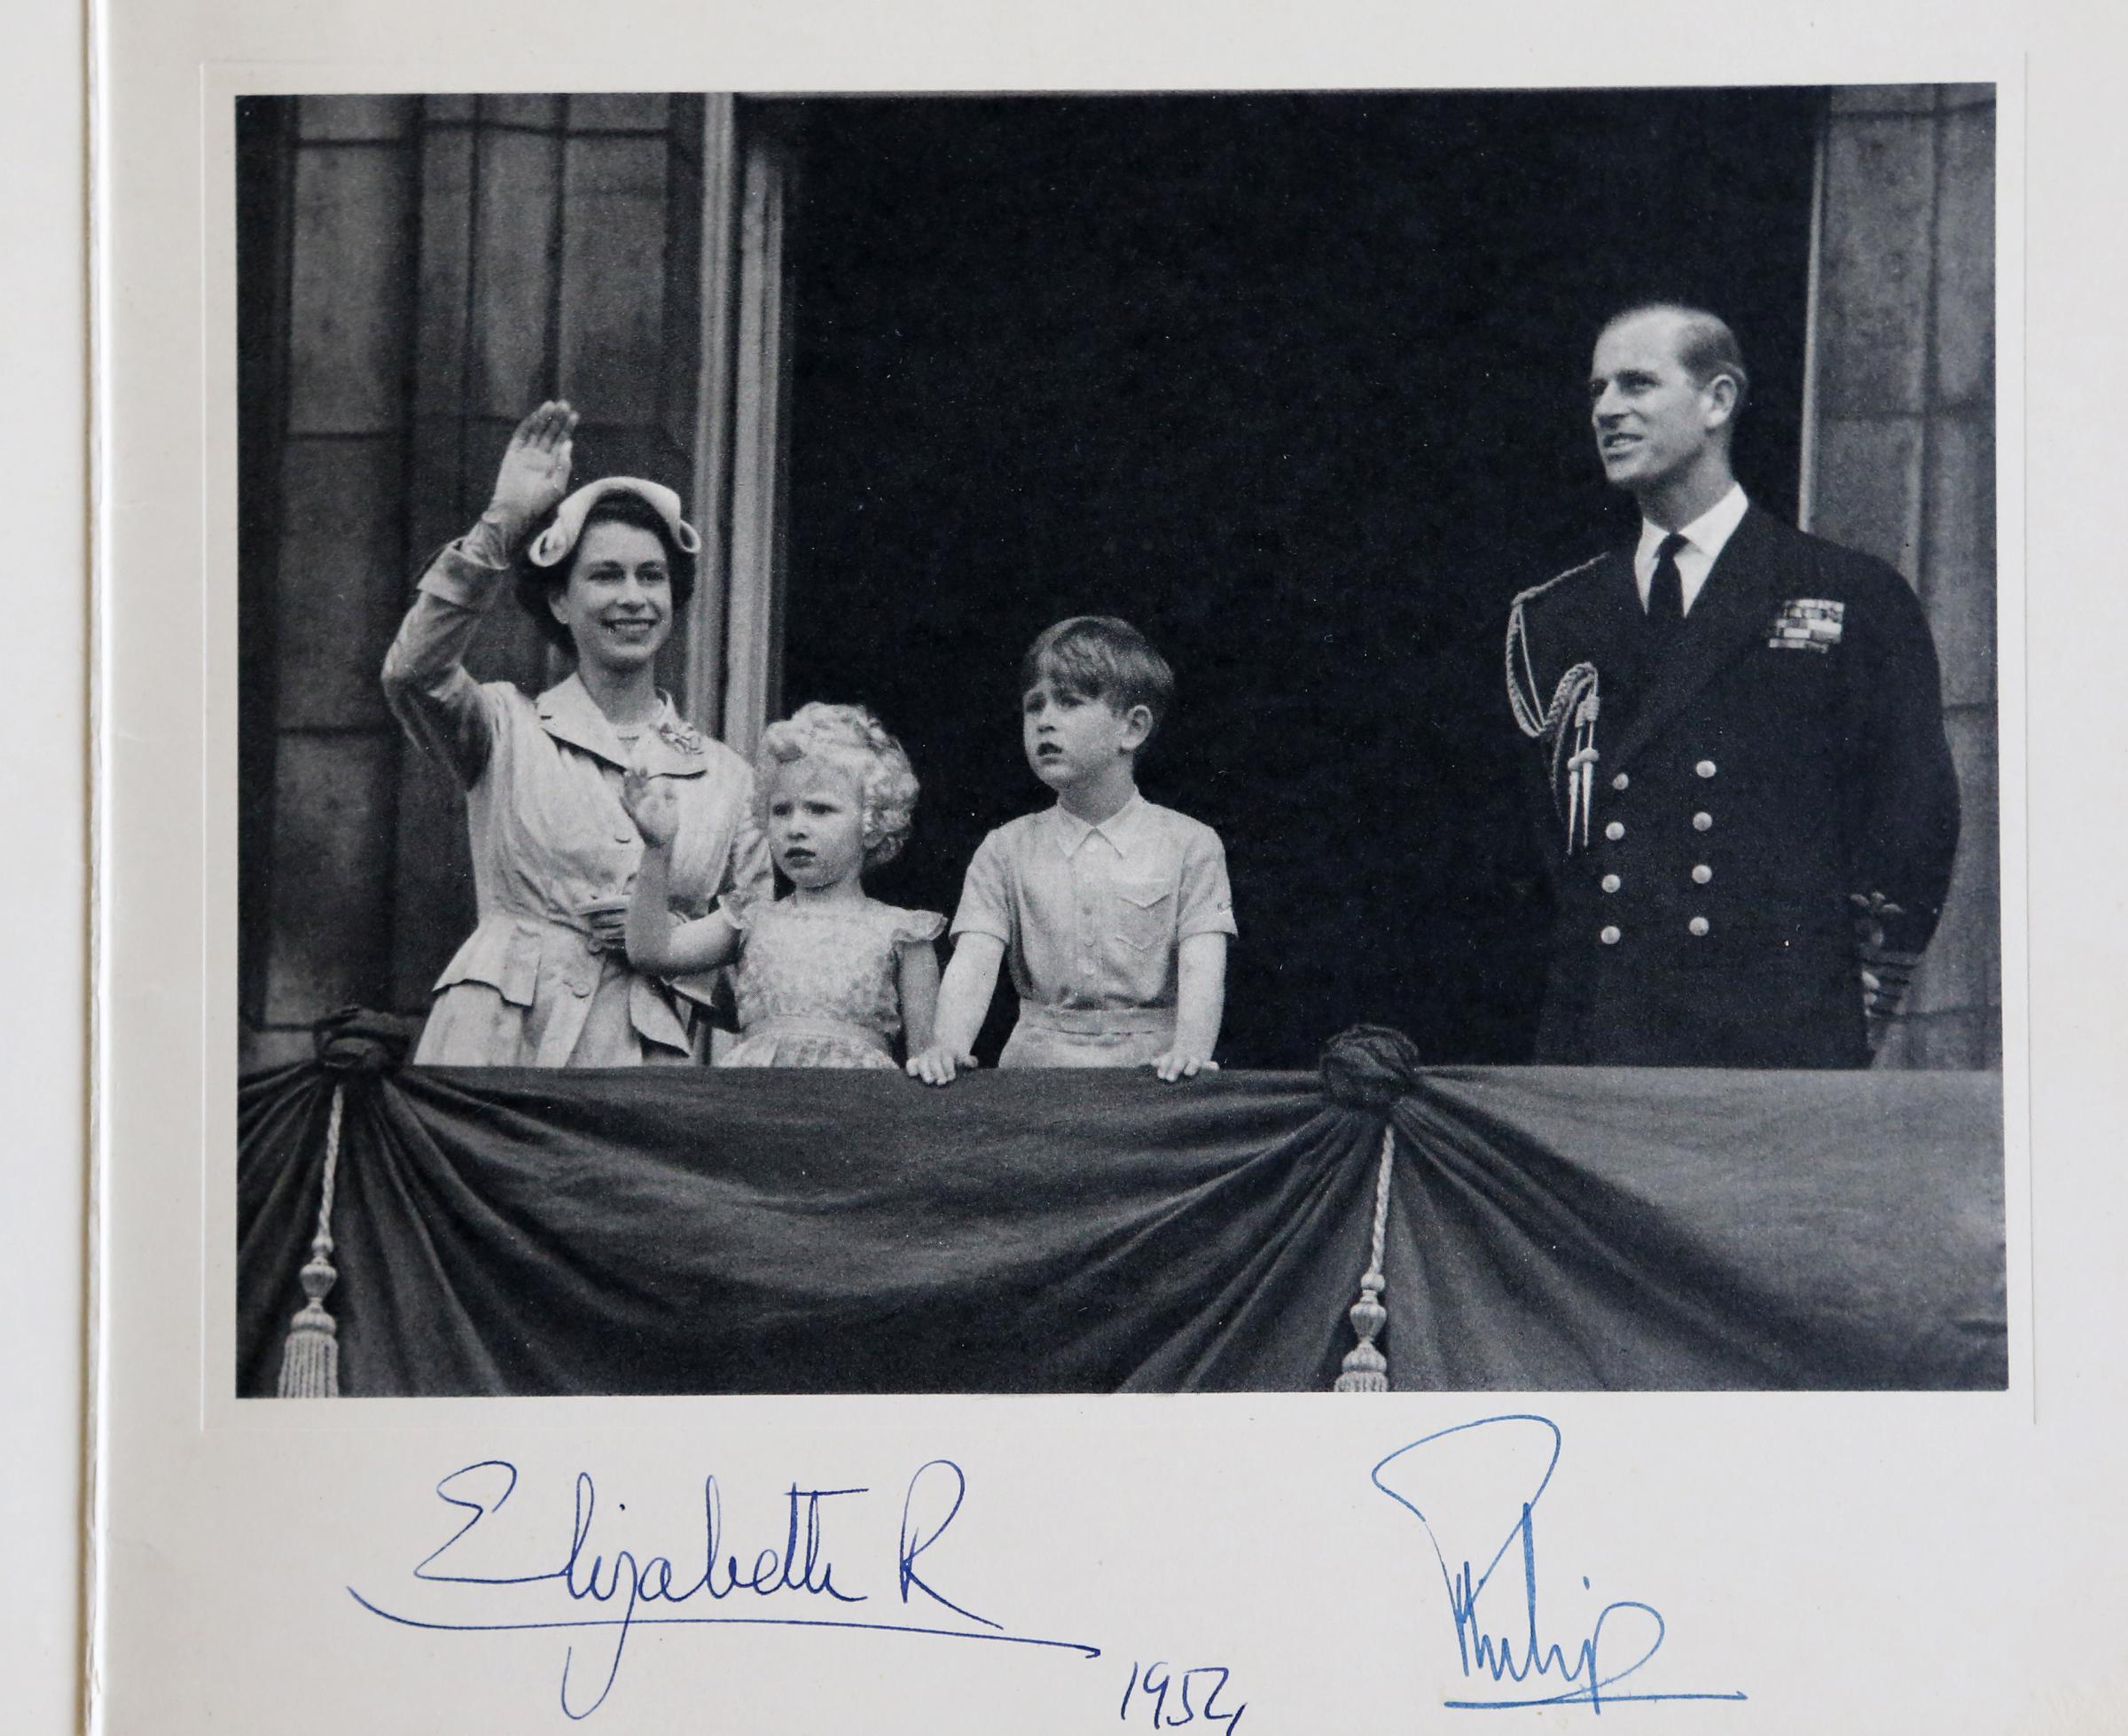 1952 Royal Christmas Card. Queen Elizabeth and Philip, Duke of Edinburgh with their children Prince Charles and Princess Anne.